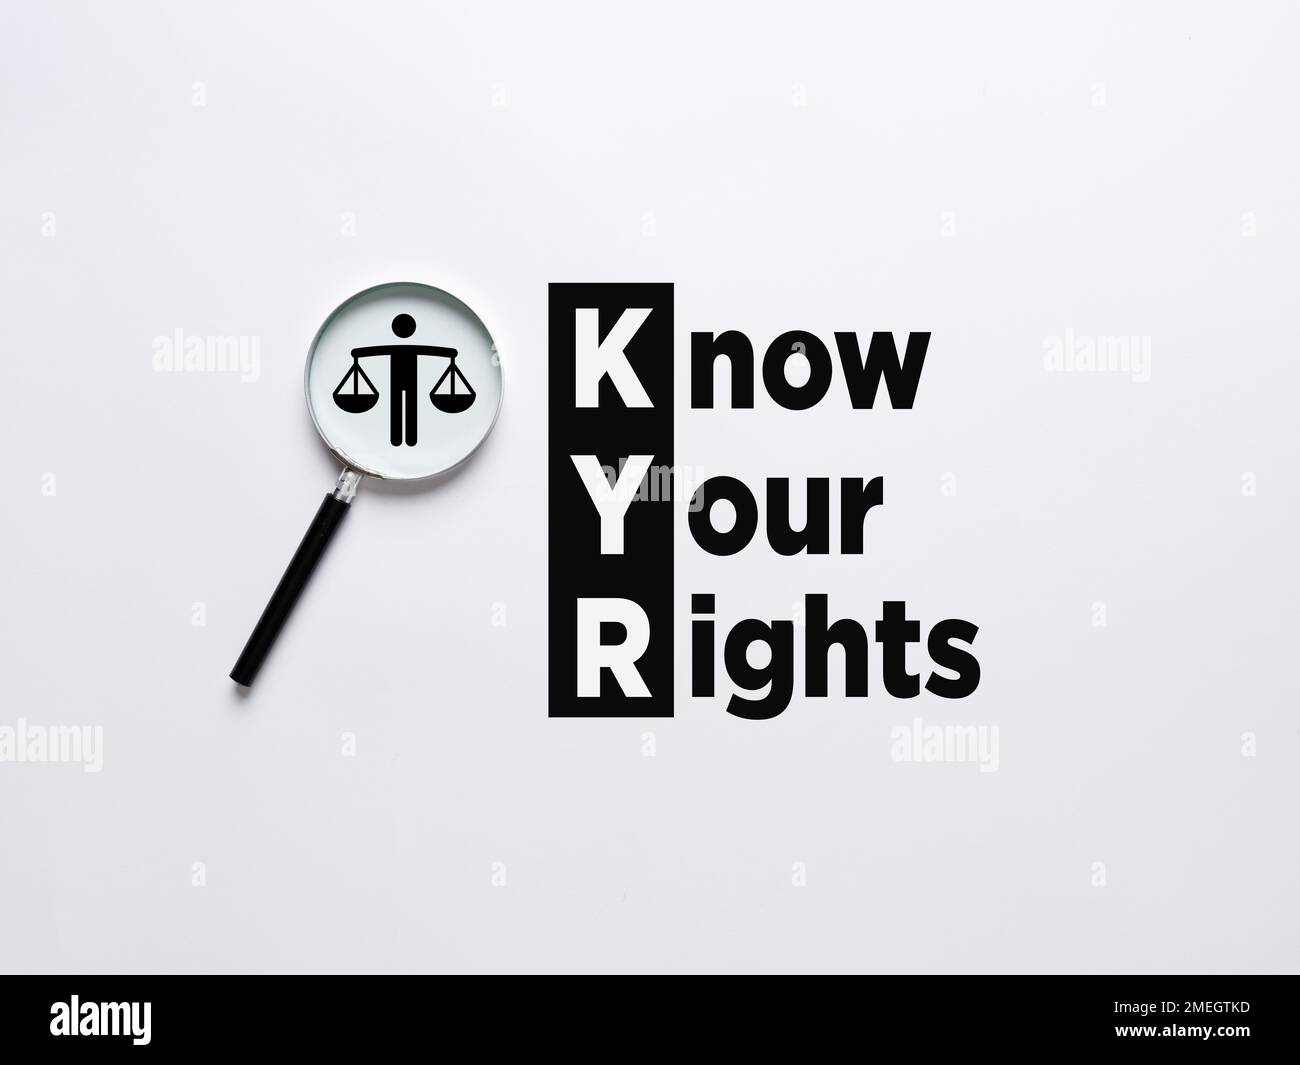 Commitment to justice. Personal or legal rights and freedom. Justice in education, business or social life. Magnifier magnifies the justice symbol wit Stock Photo